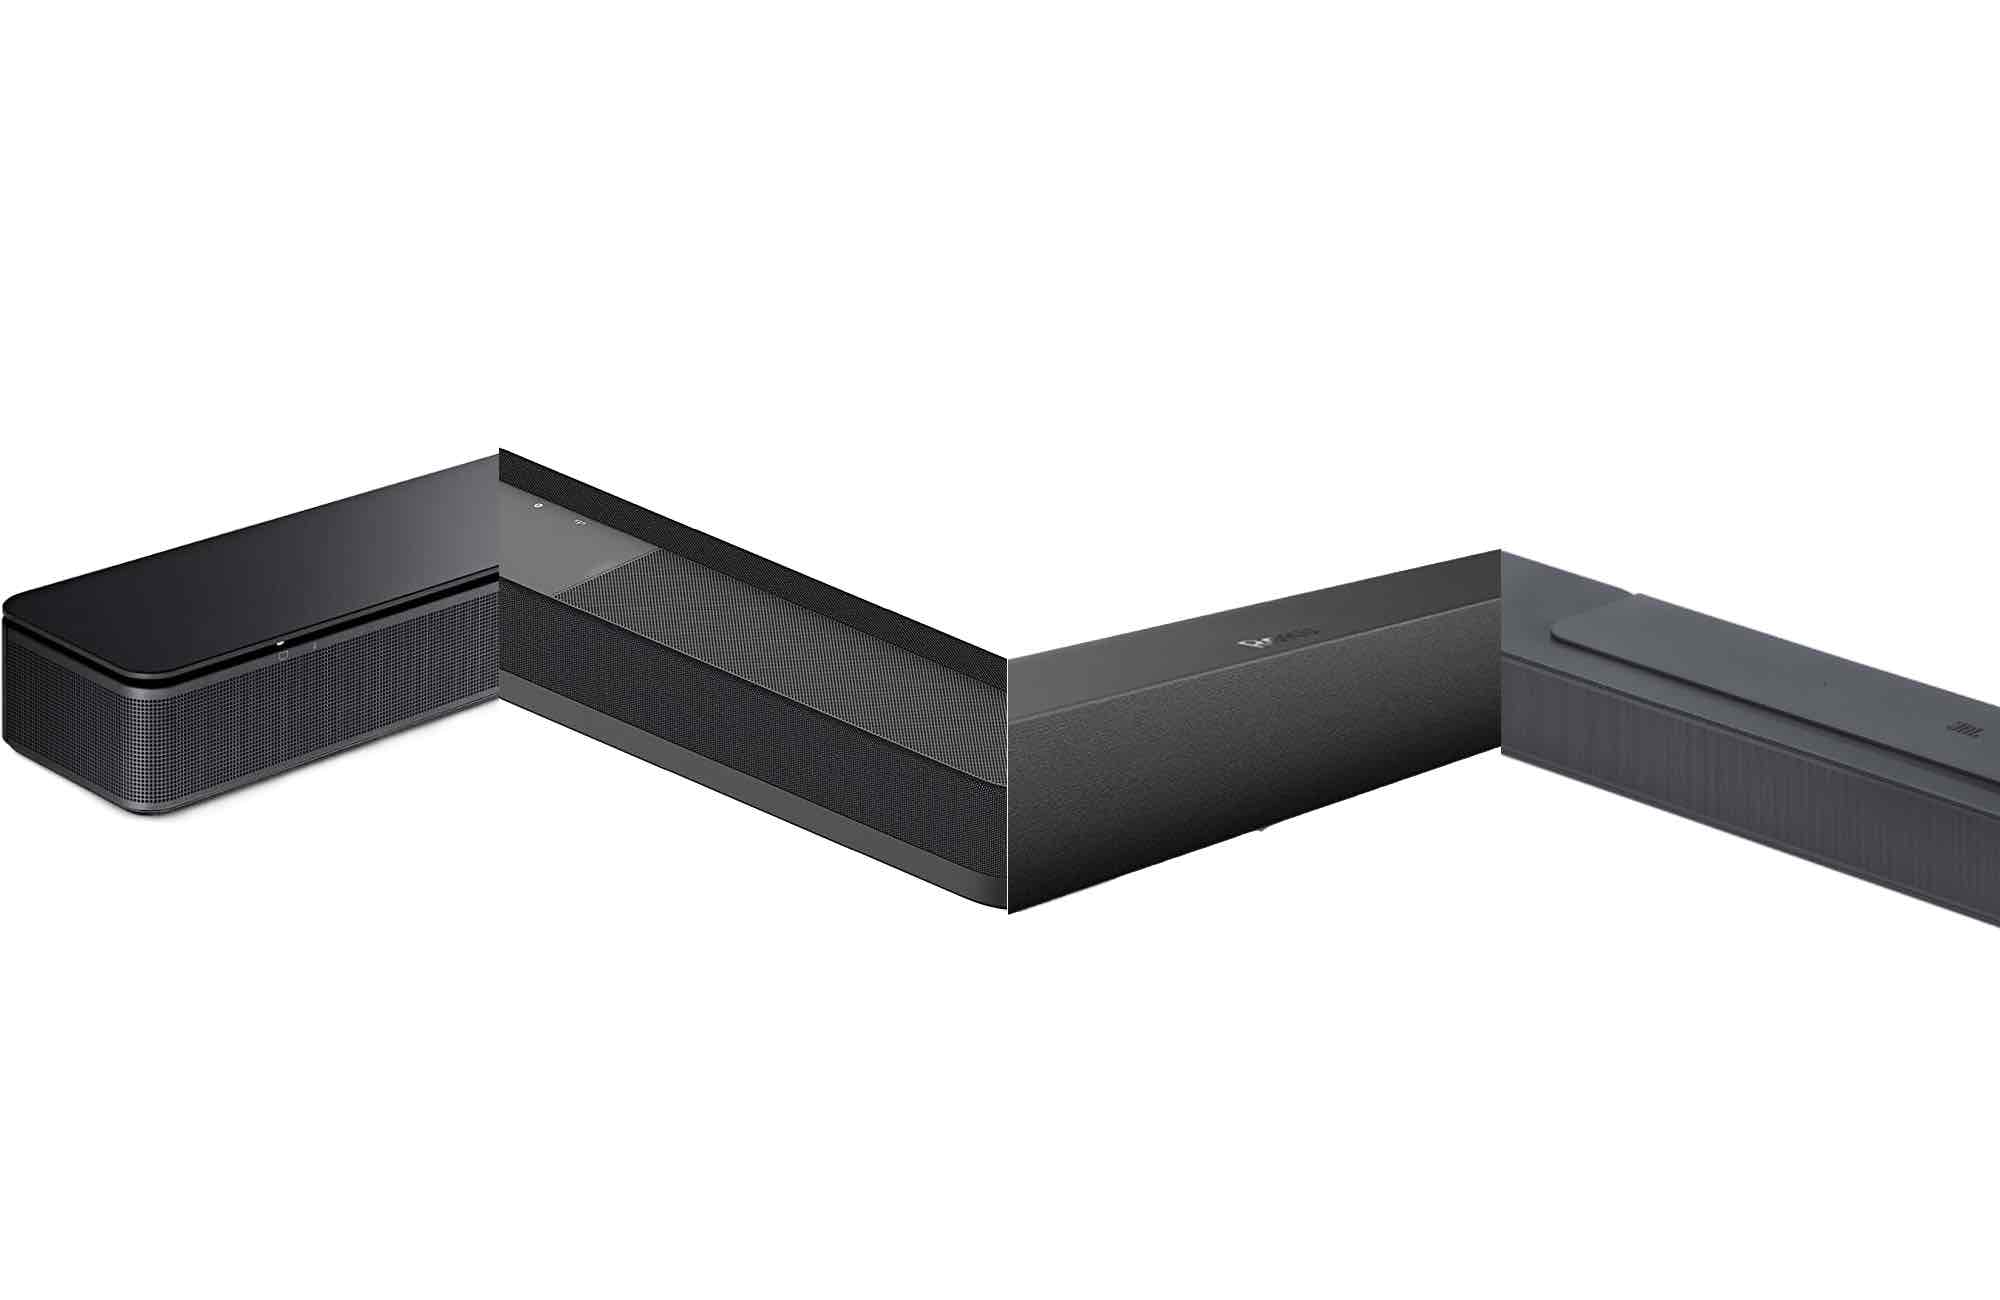 The best soundbars for any room and budget